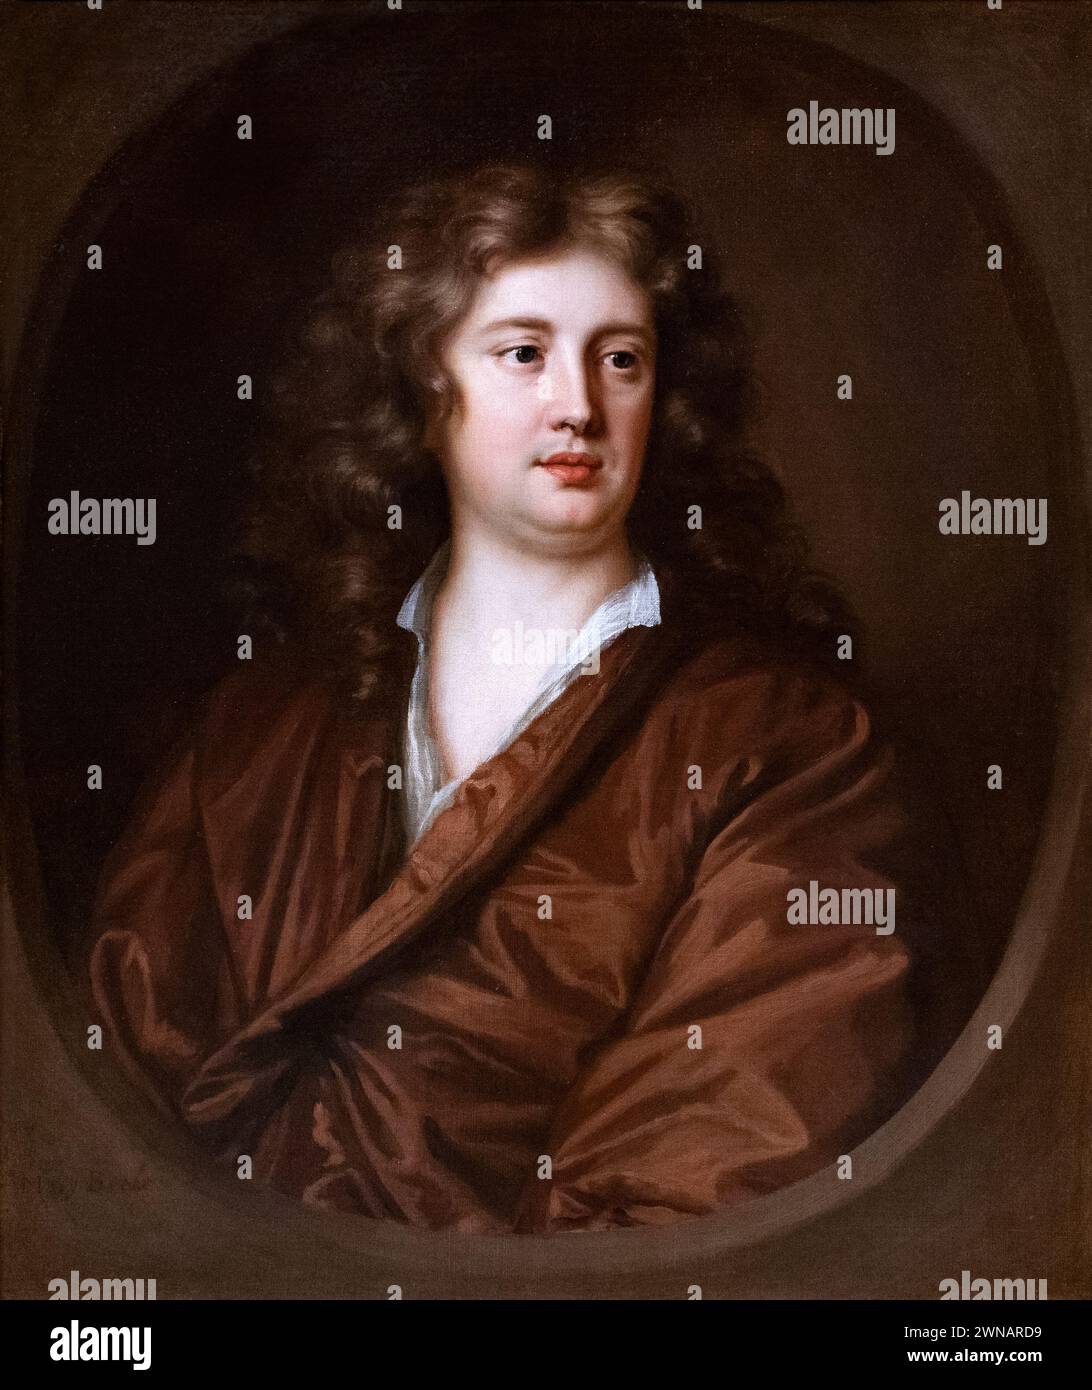 Mary Beale painting, 'Portrait of a Young Man', 1680. 17th century English female artist and portrait painter, 1633-1699 Stock Photo